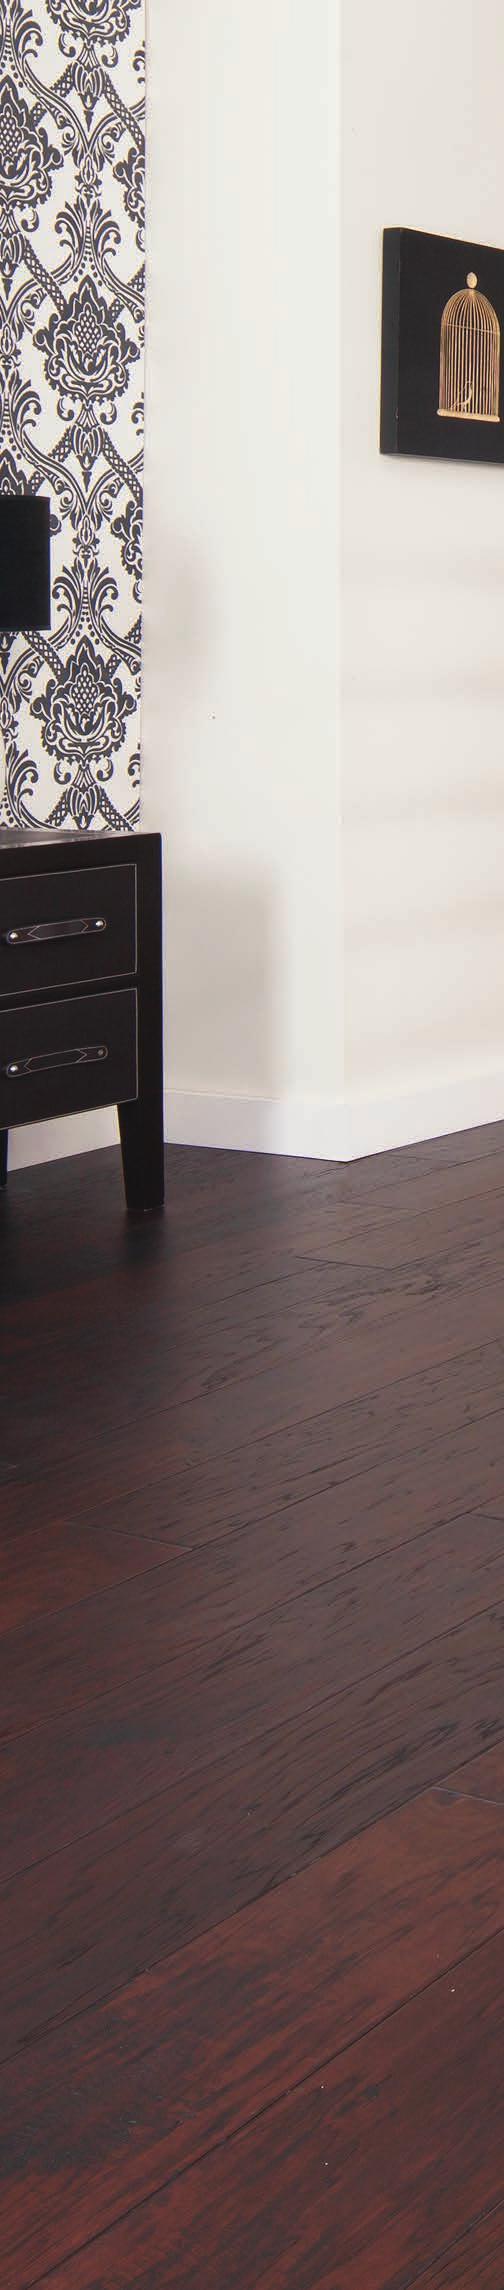 Hickory profile The American hardwood industry dates back to the first European settlers, there is a wealth of experience in processing native hardwoods of North America.